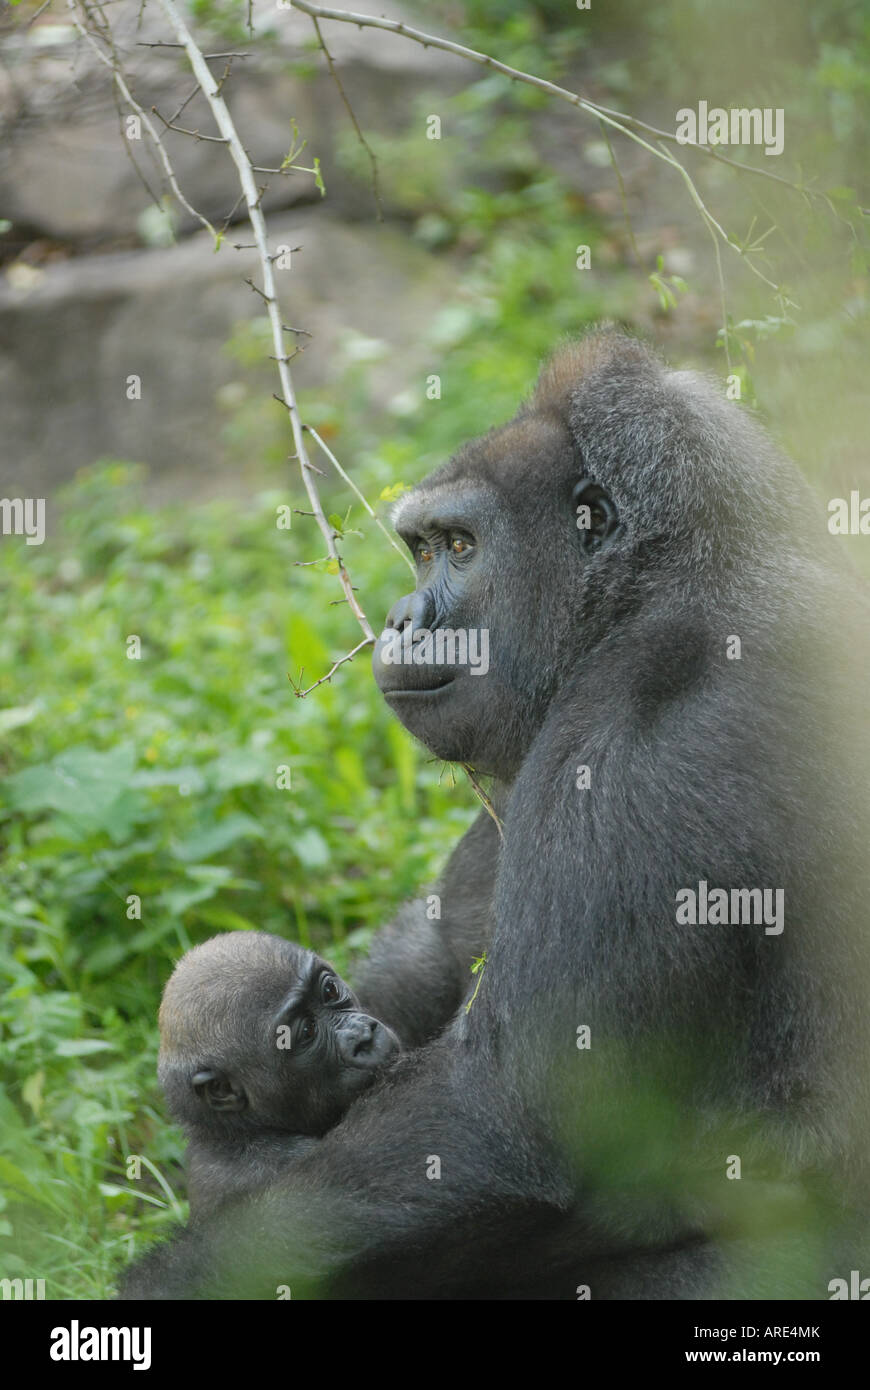 Gorilla mother and young baby Franklin Park Zoo Boston Massachusetts (MA) United States of America (USA) Stock Photo